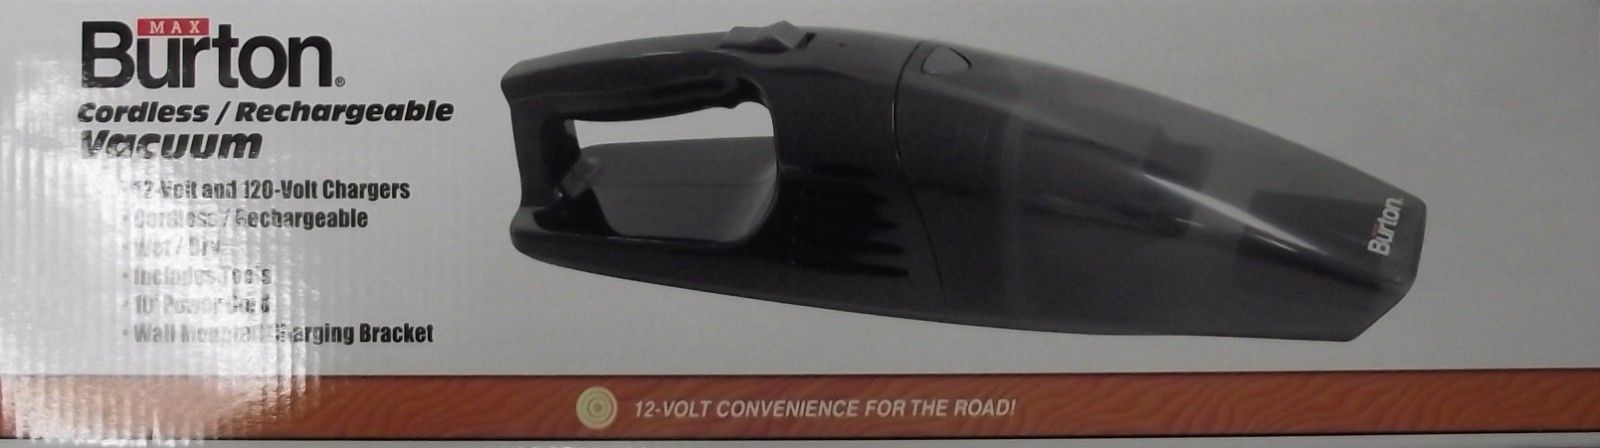 Max Burton 6981 12 Volt And 120 Volt Cordless And Rechargeable Hand Vacuum